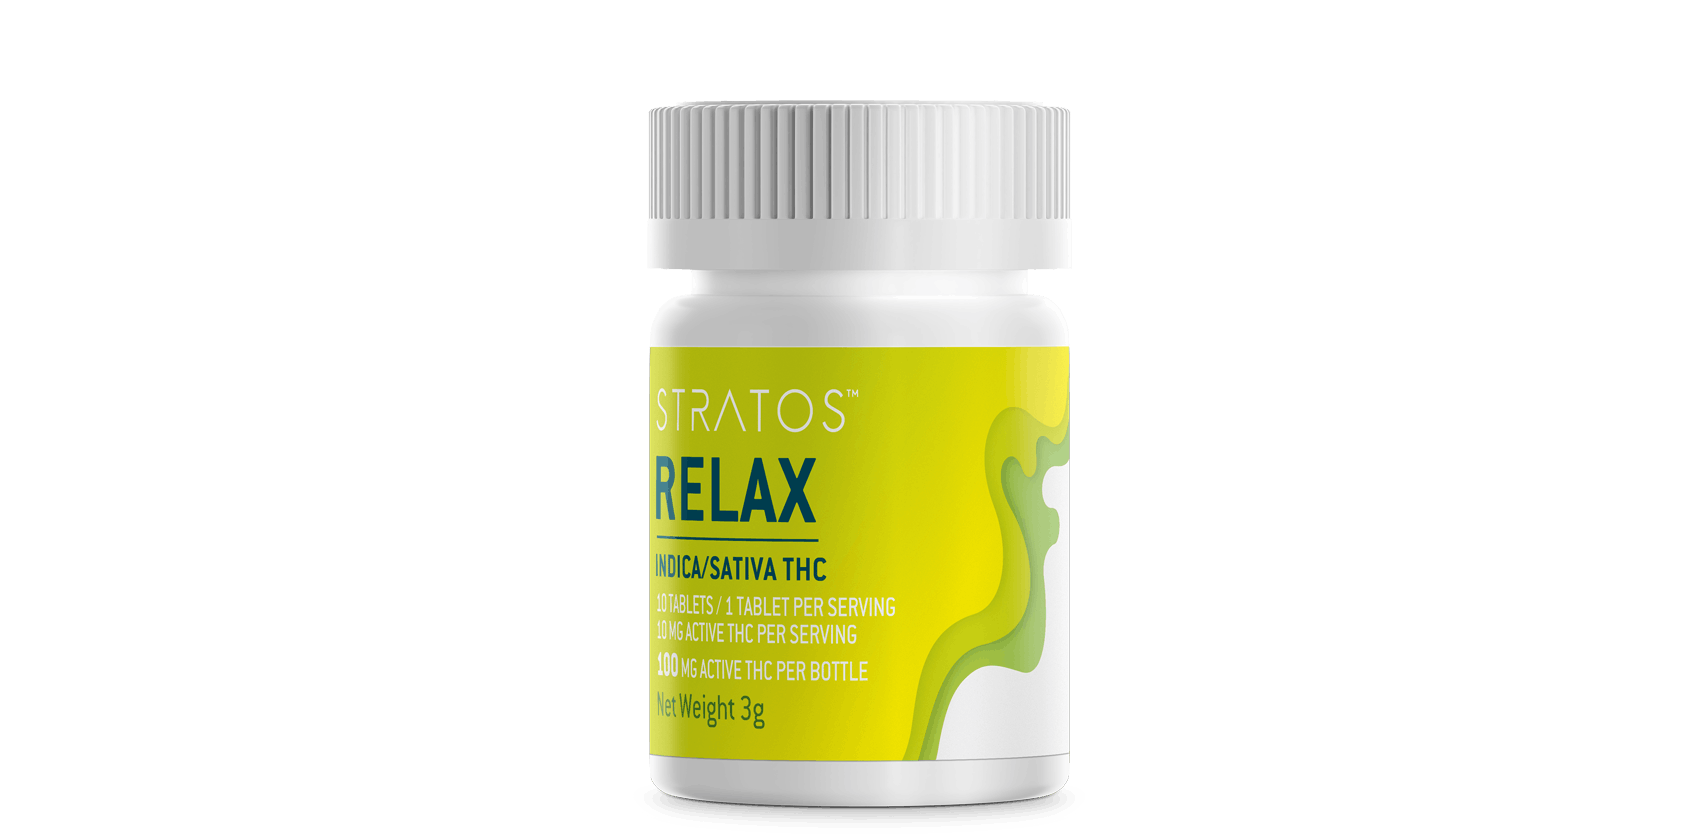 Stratos Relax Capsules 100mg